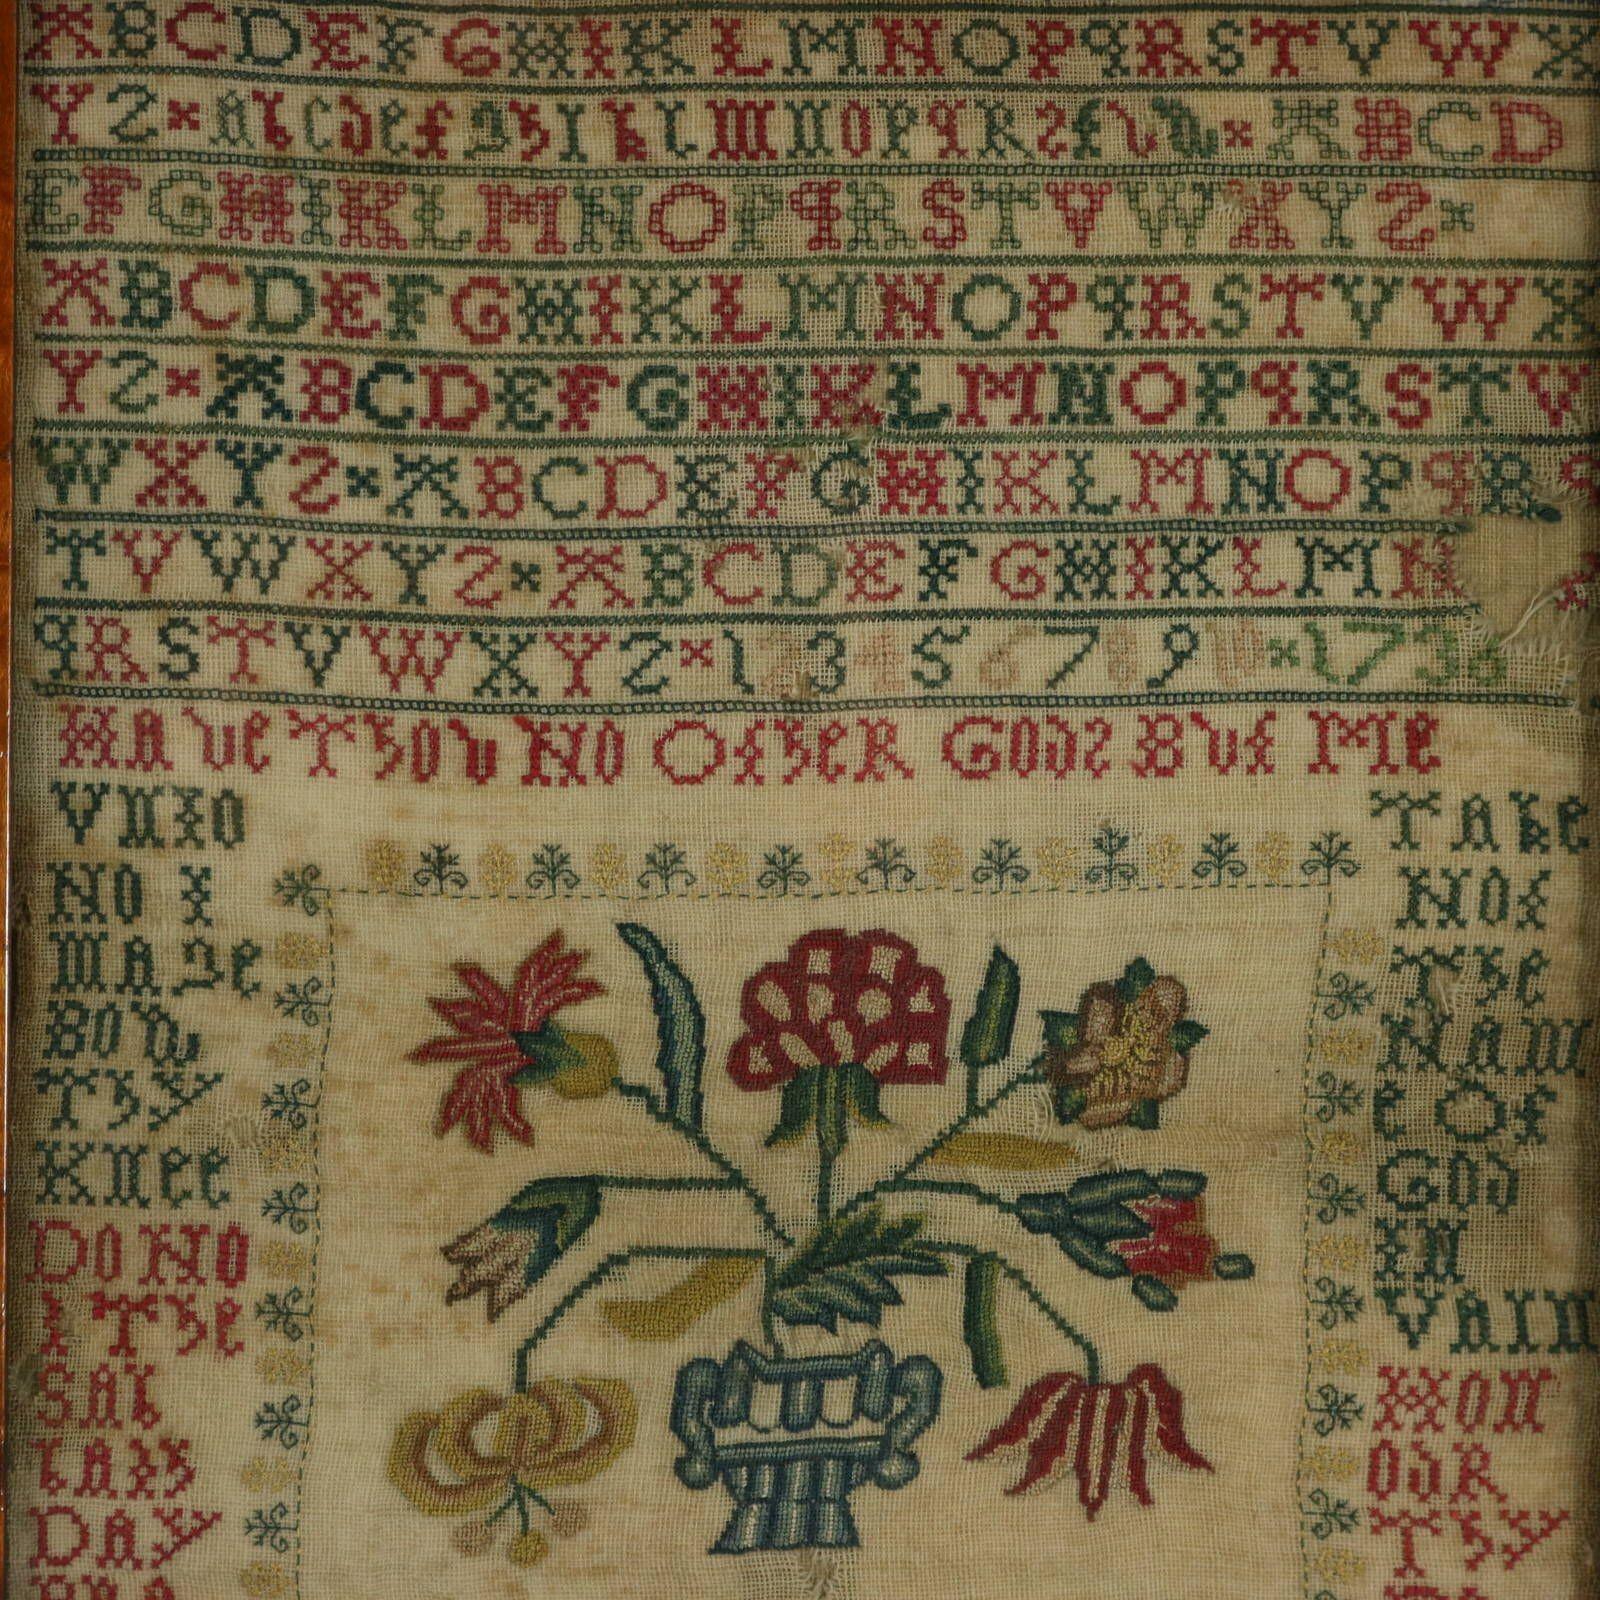 George II period Sampler Stitched in 1736. Possibly of Scottish origin, suggested by the following characteristics: predominant green and red colouration, curlicues bordering the central flowers motif and the peacock with a 7 branched tail. The